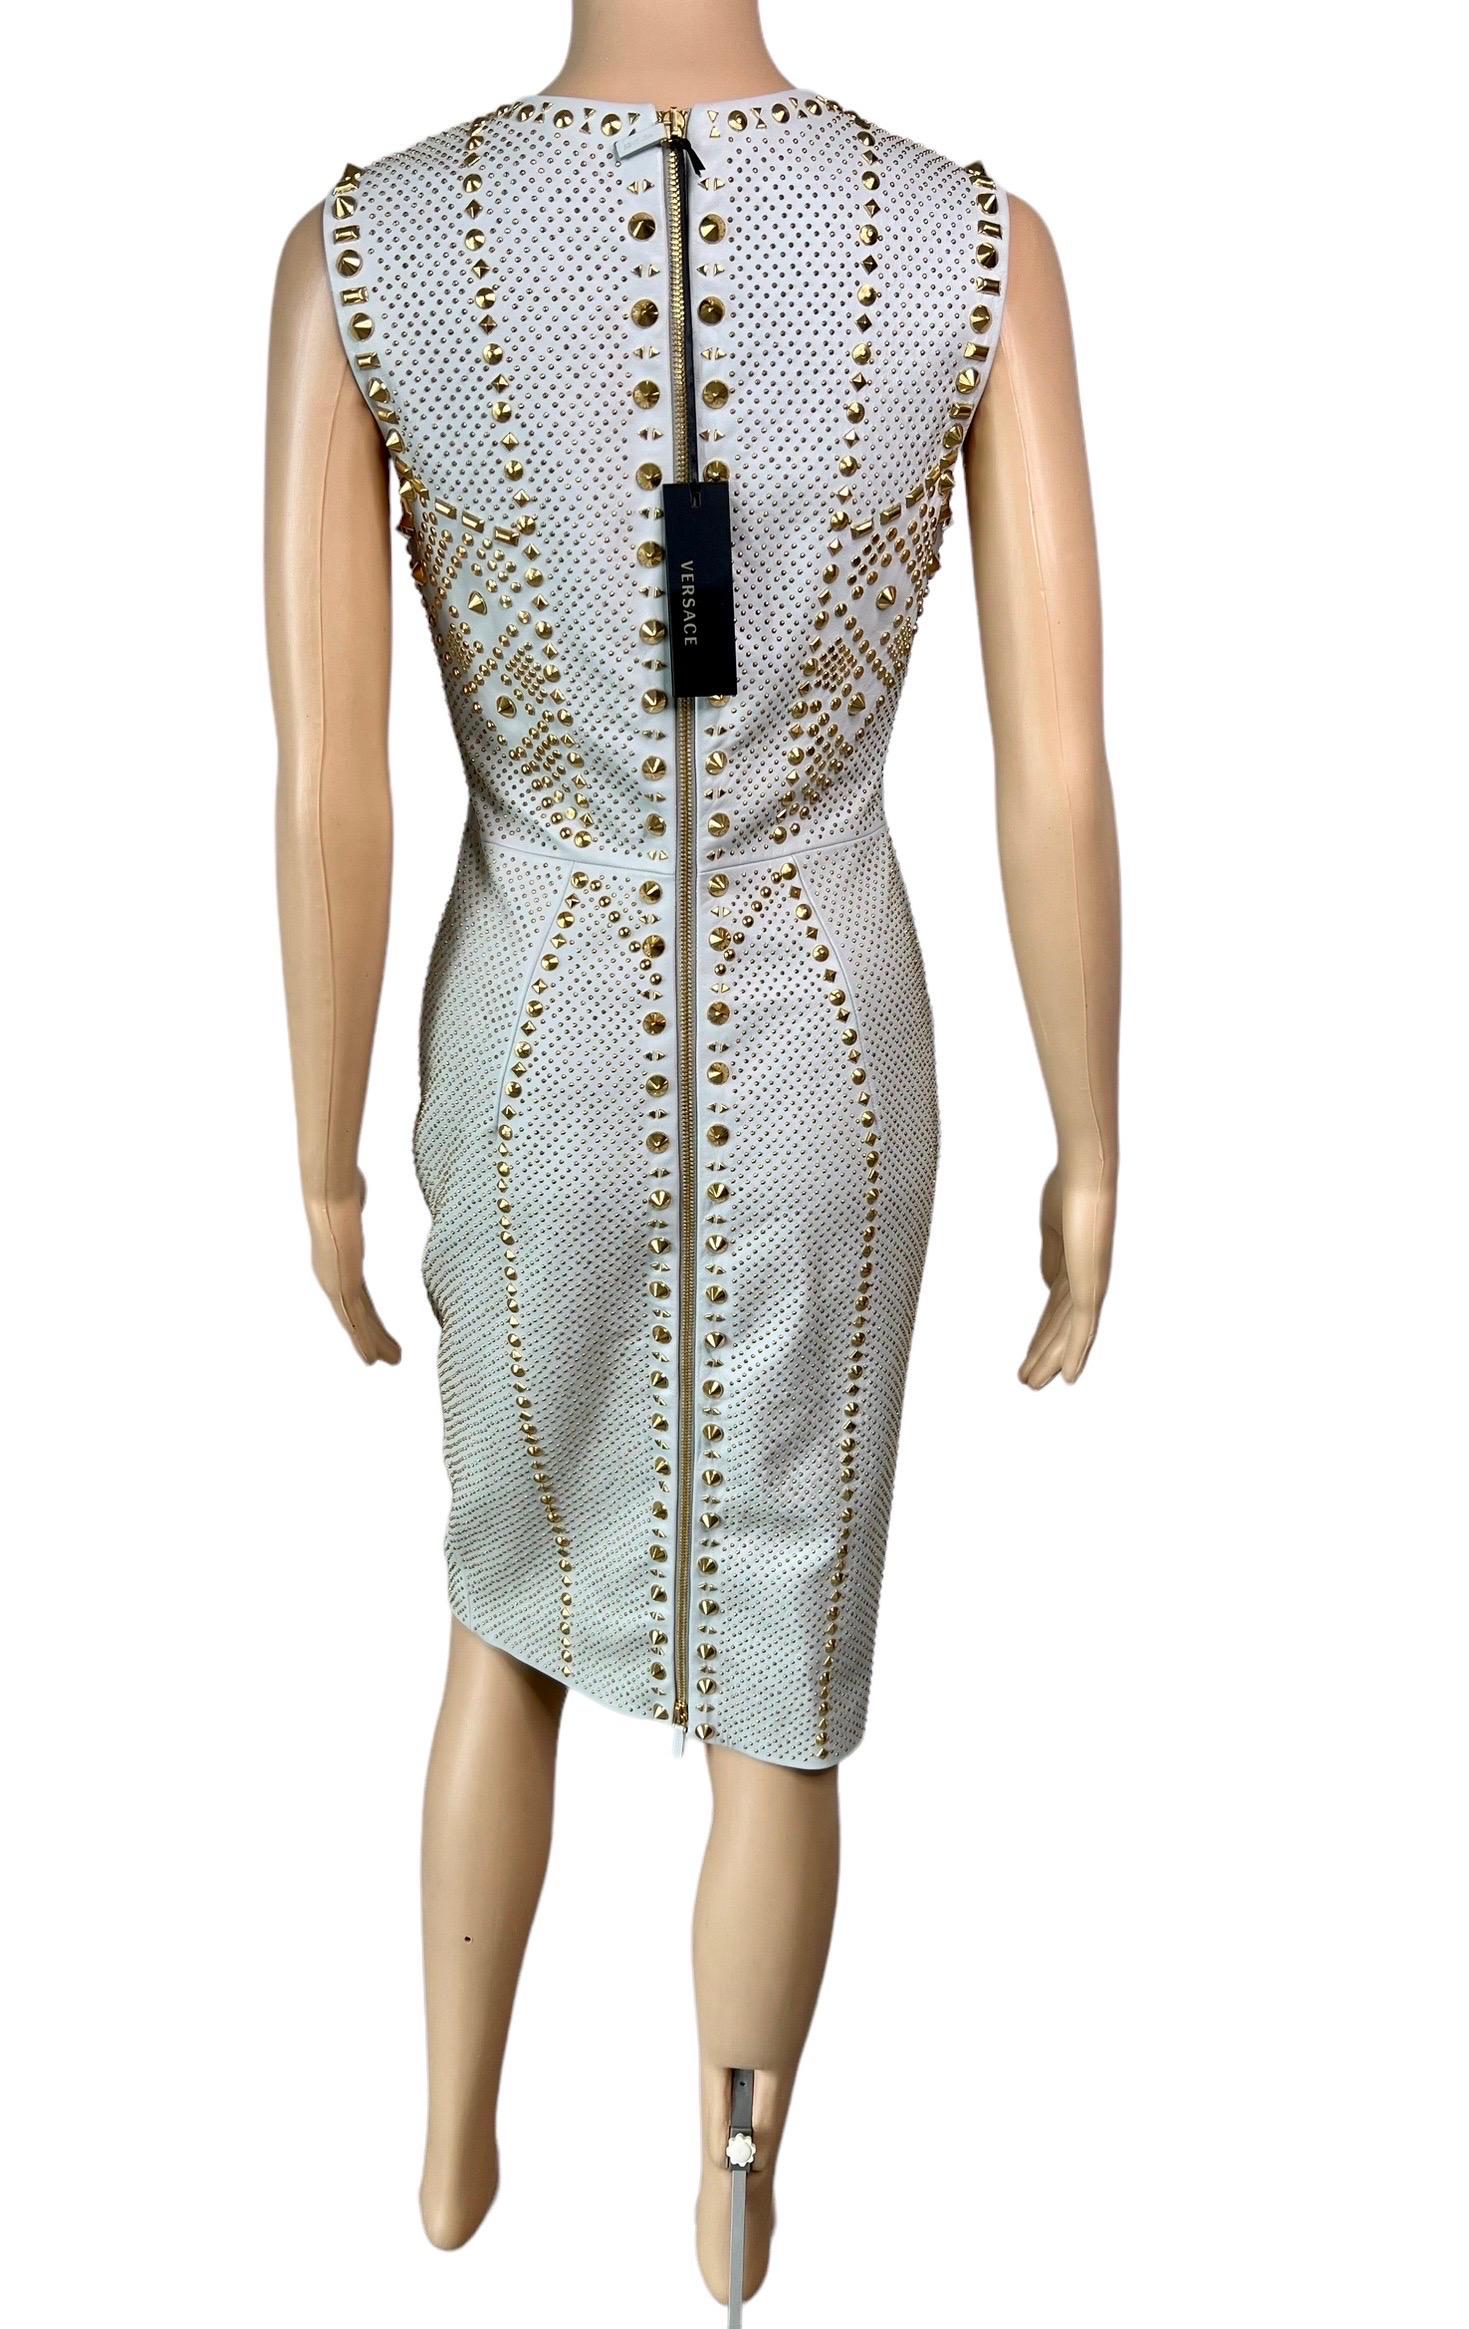 Gray Versace S/S 2012 Runway Unworn Embellished Gold Studded Leather Dress  For Sale